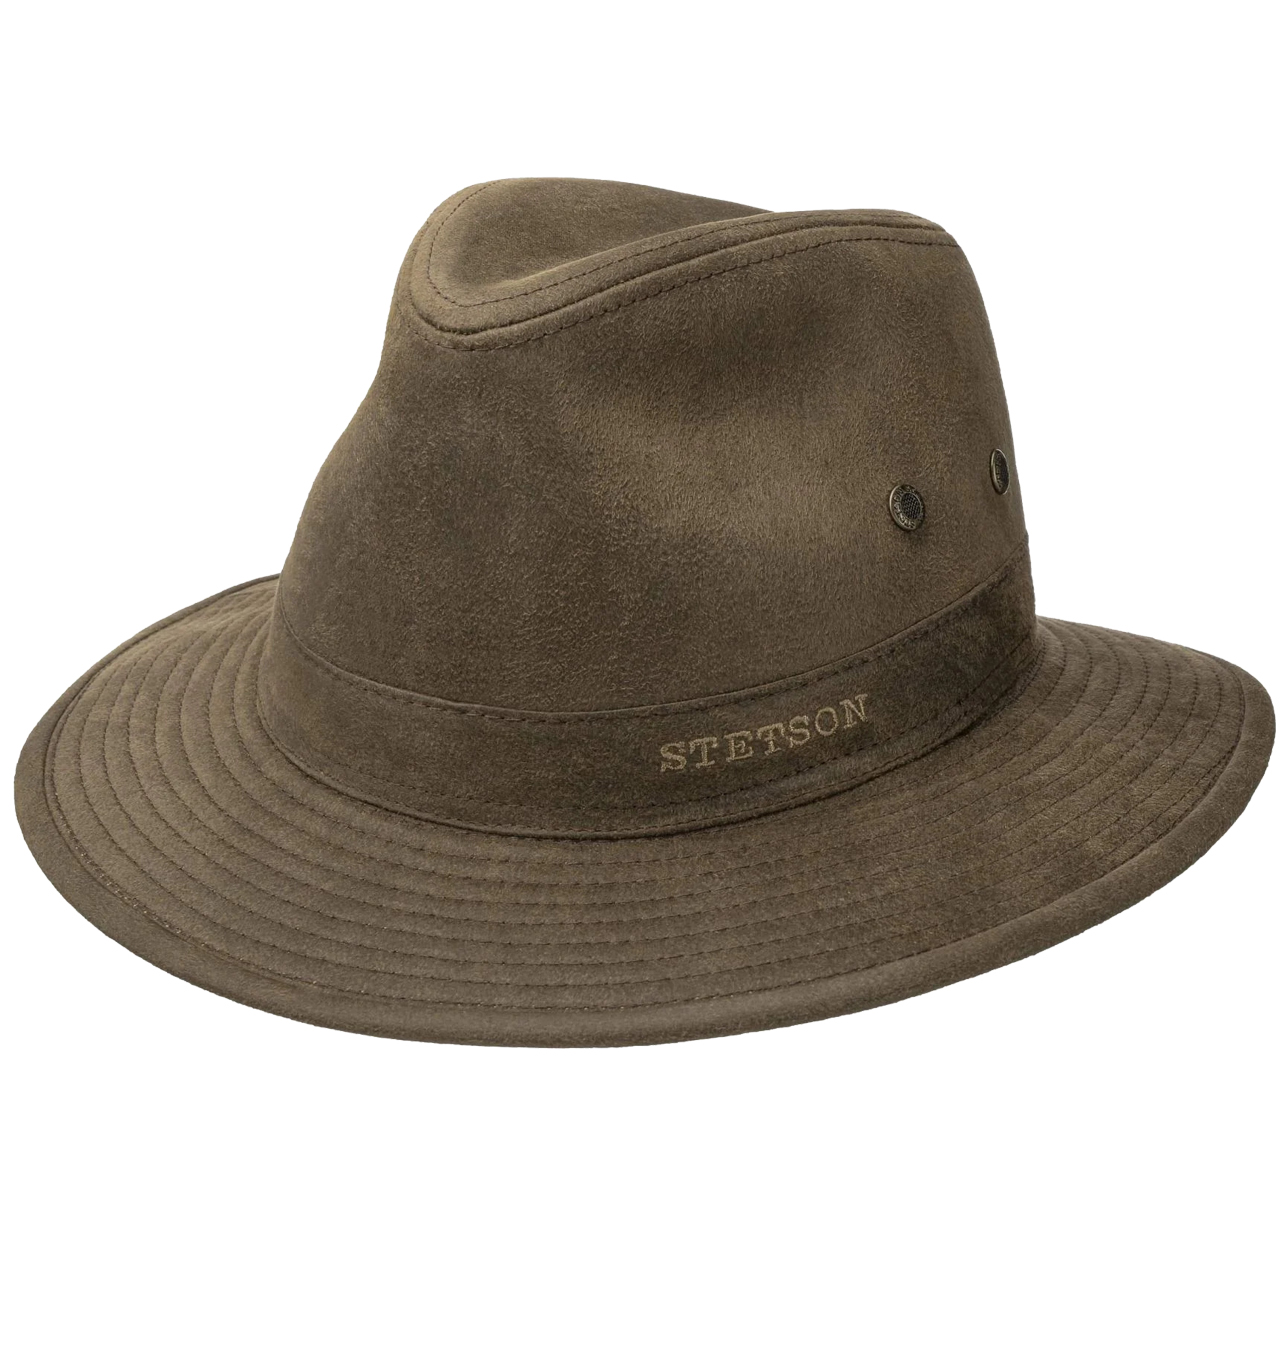 Stetson---Stampton-UV-Protected-Traveller-Hat---Brown1